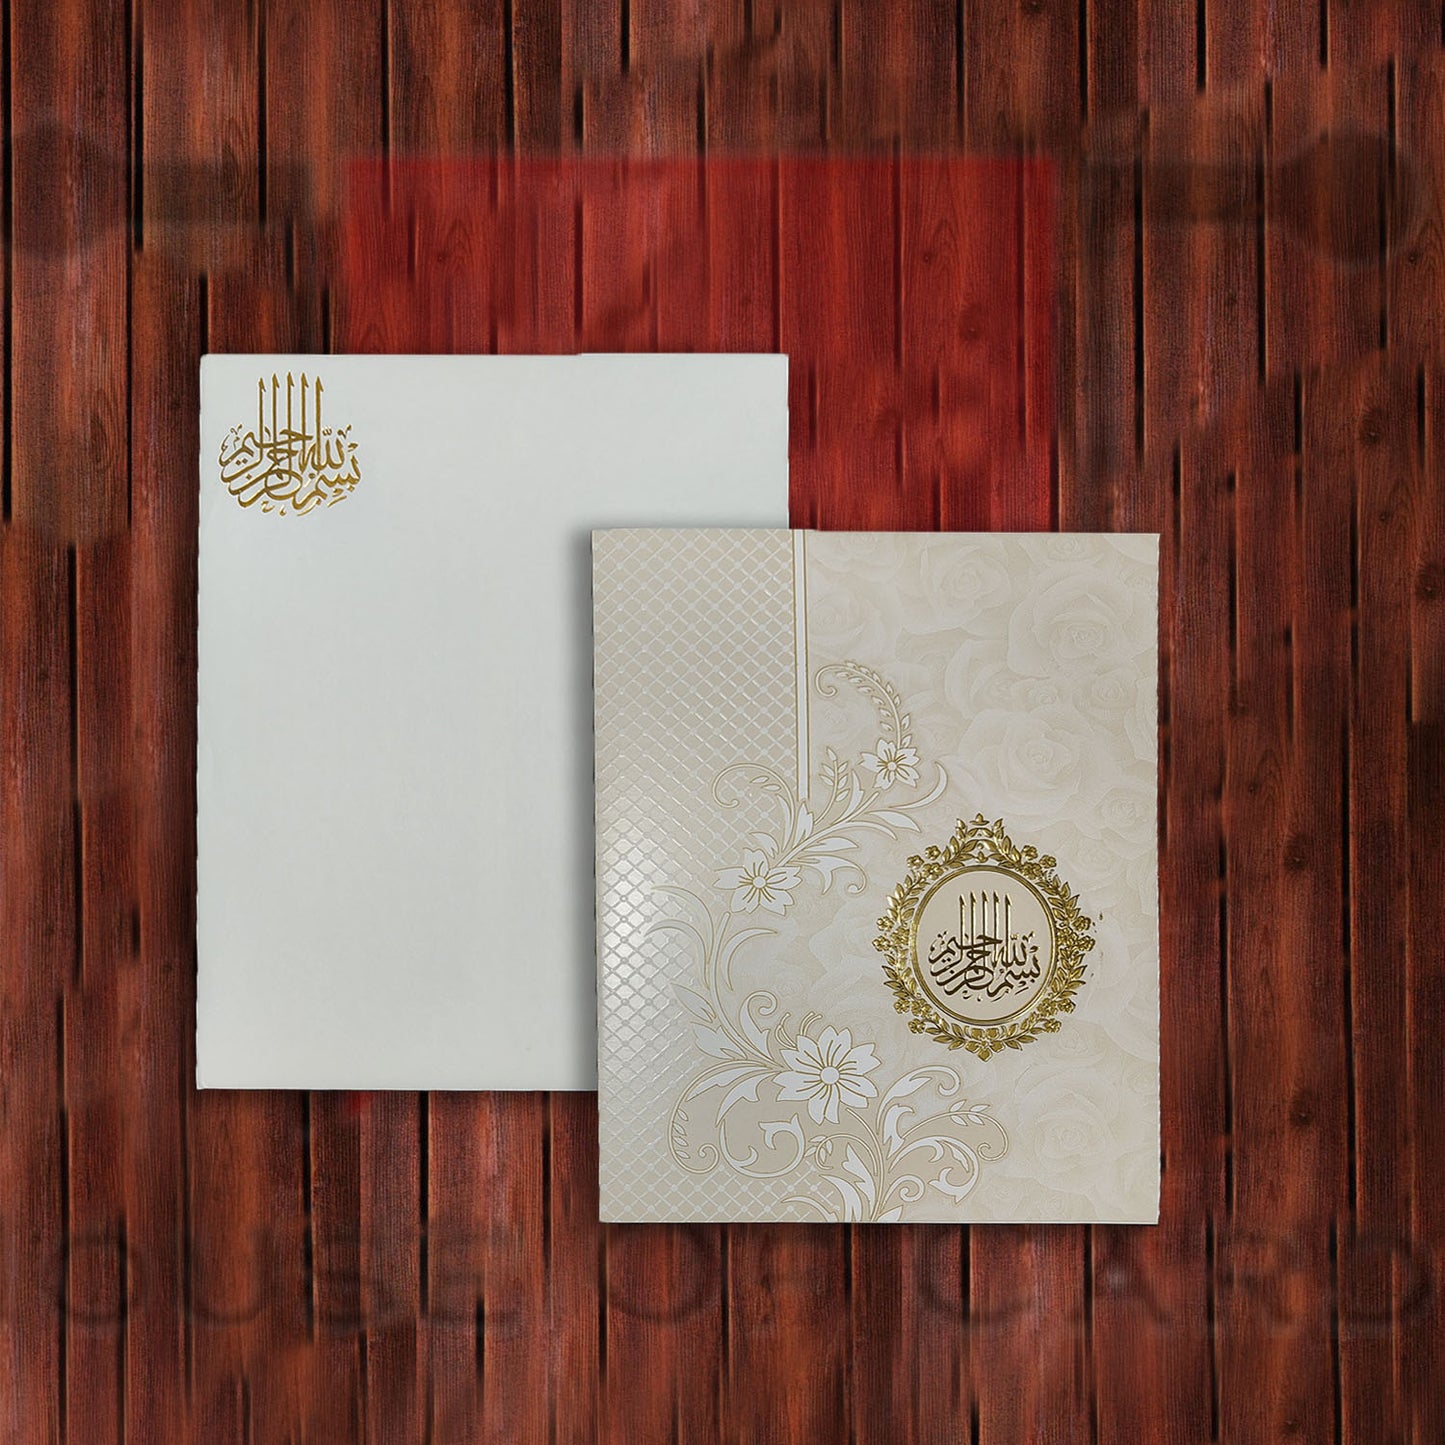 Simple White and Cream Shade Invitation With Floral Imprints